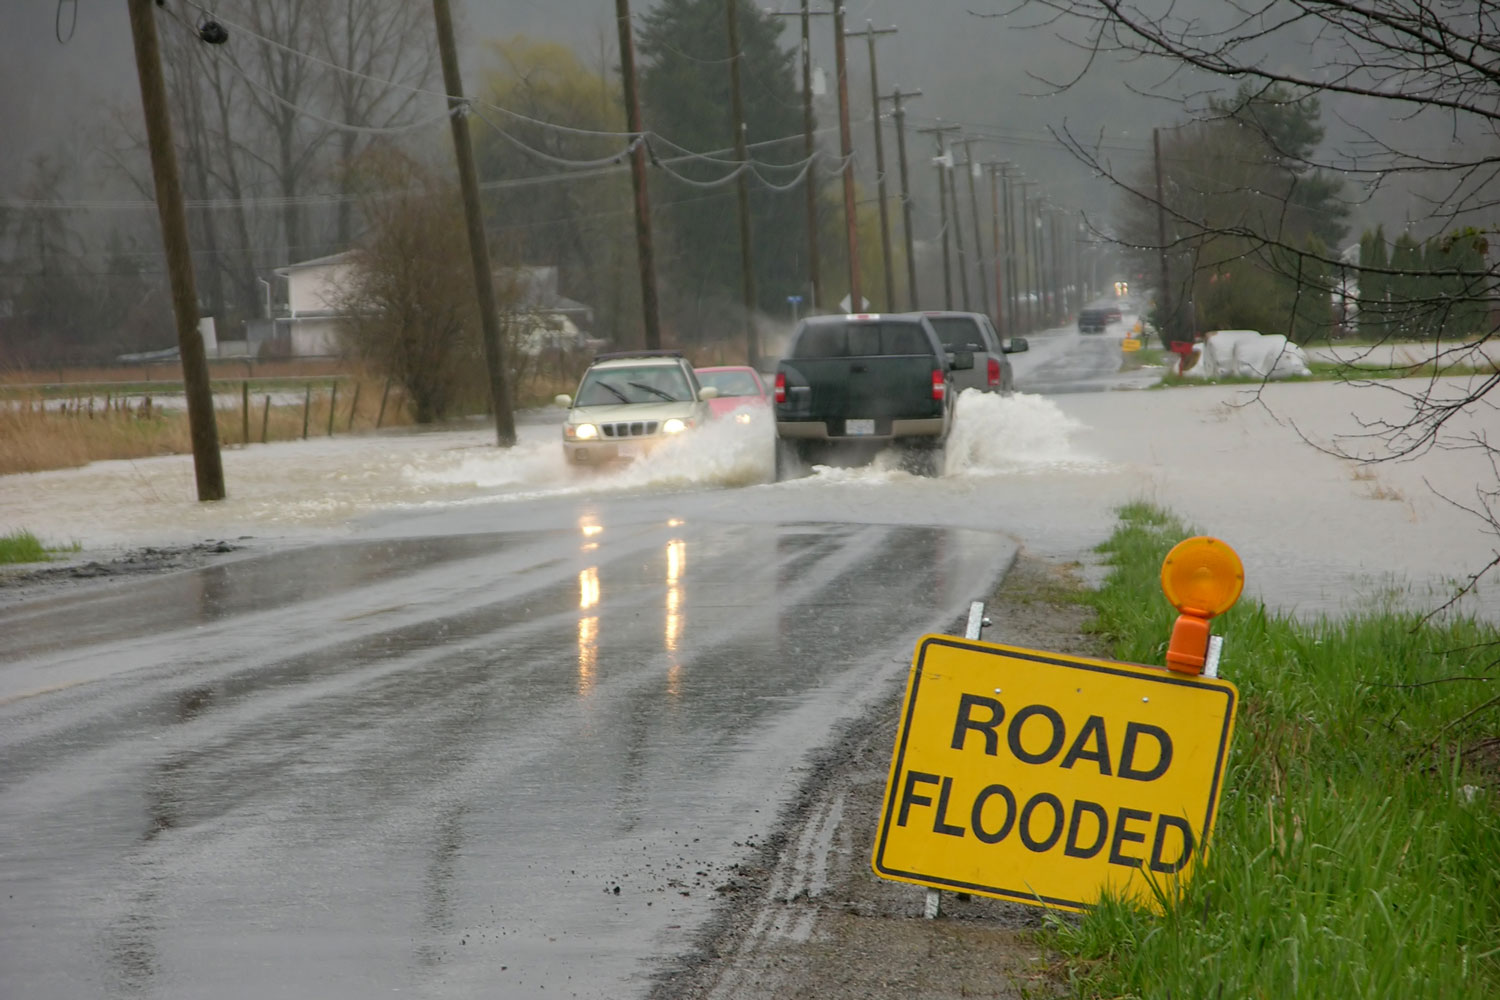 Cars in flooded road with road flooded sign